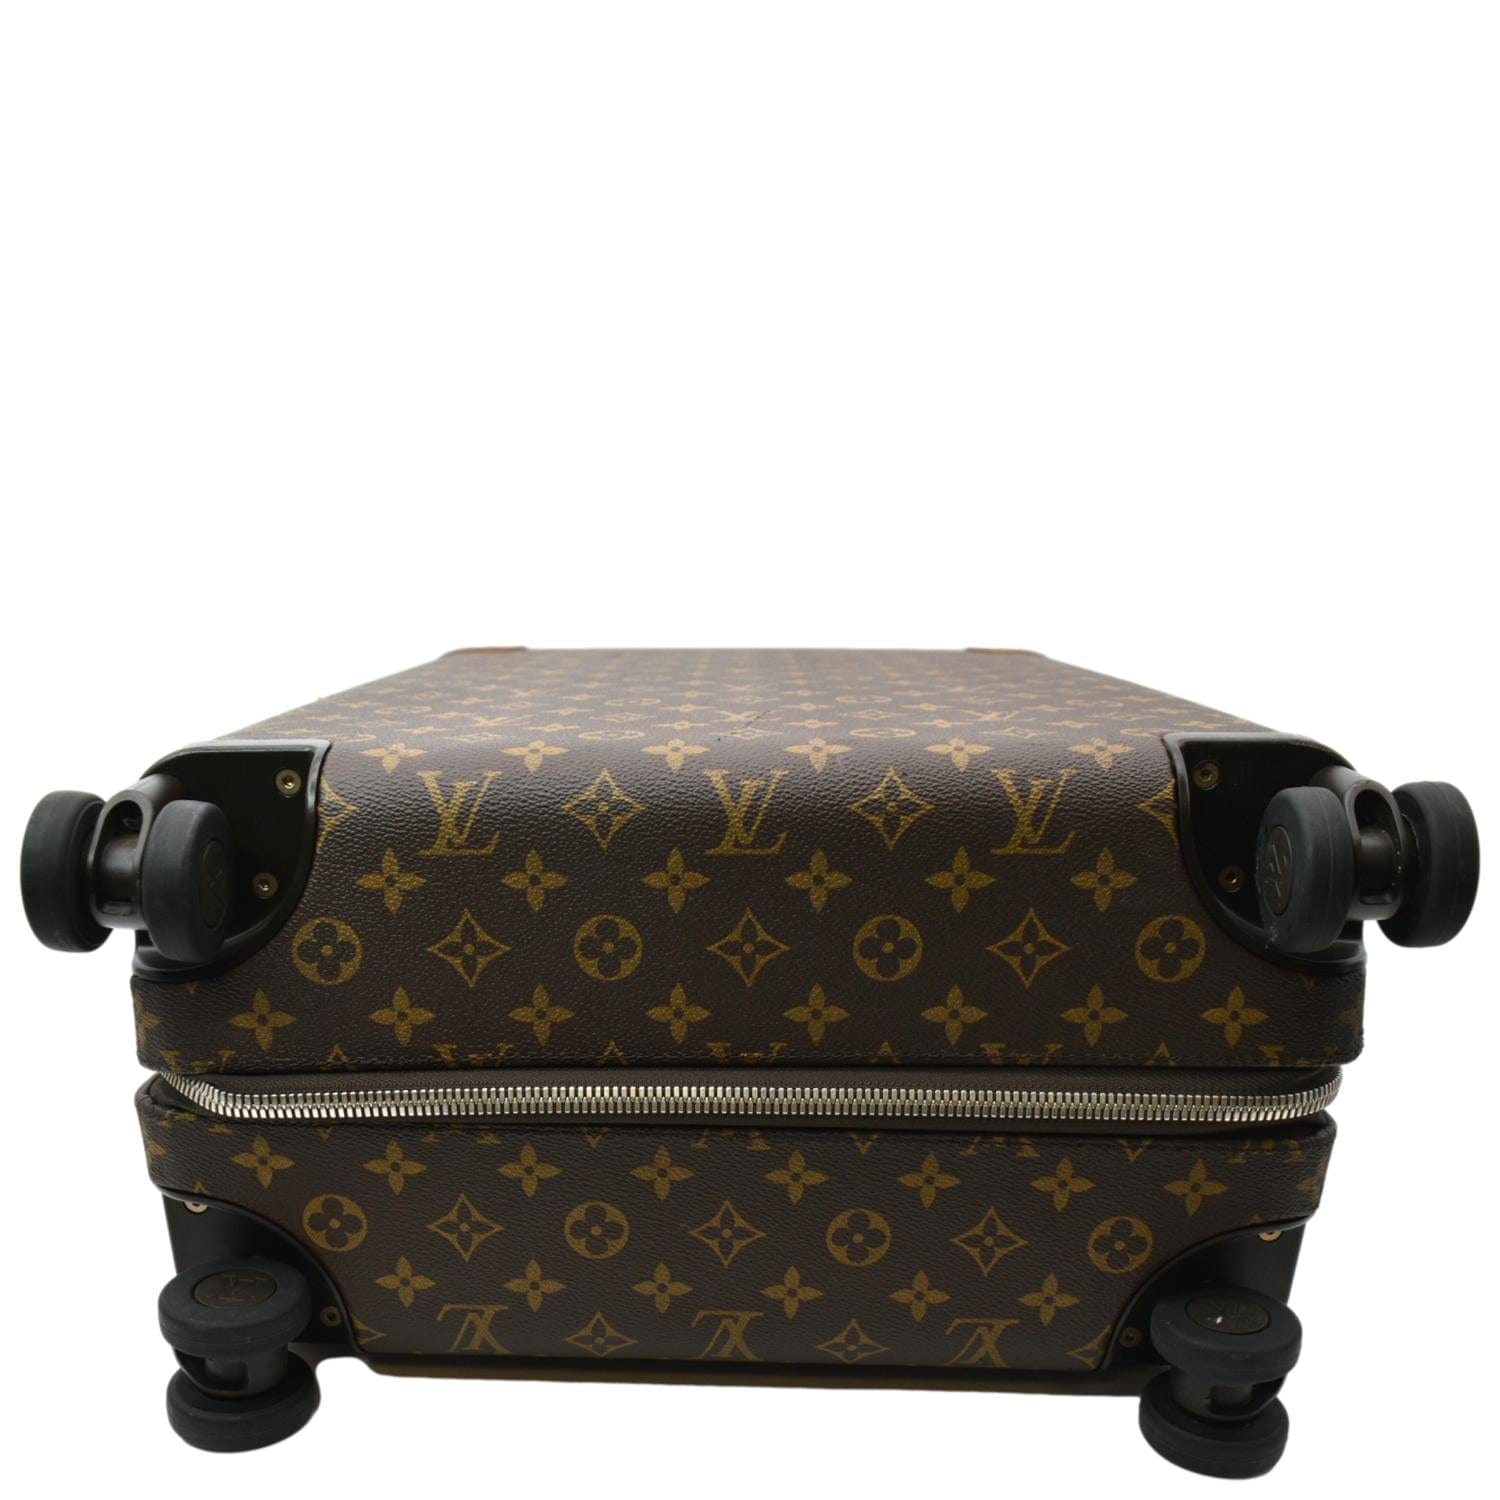 LOUIS VUITTON SUITCASE 5 YEAR REVIEW: HORIZON 55 ROLLING LUGGAGE